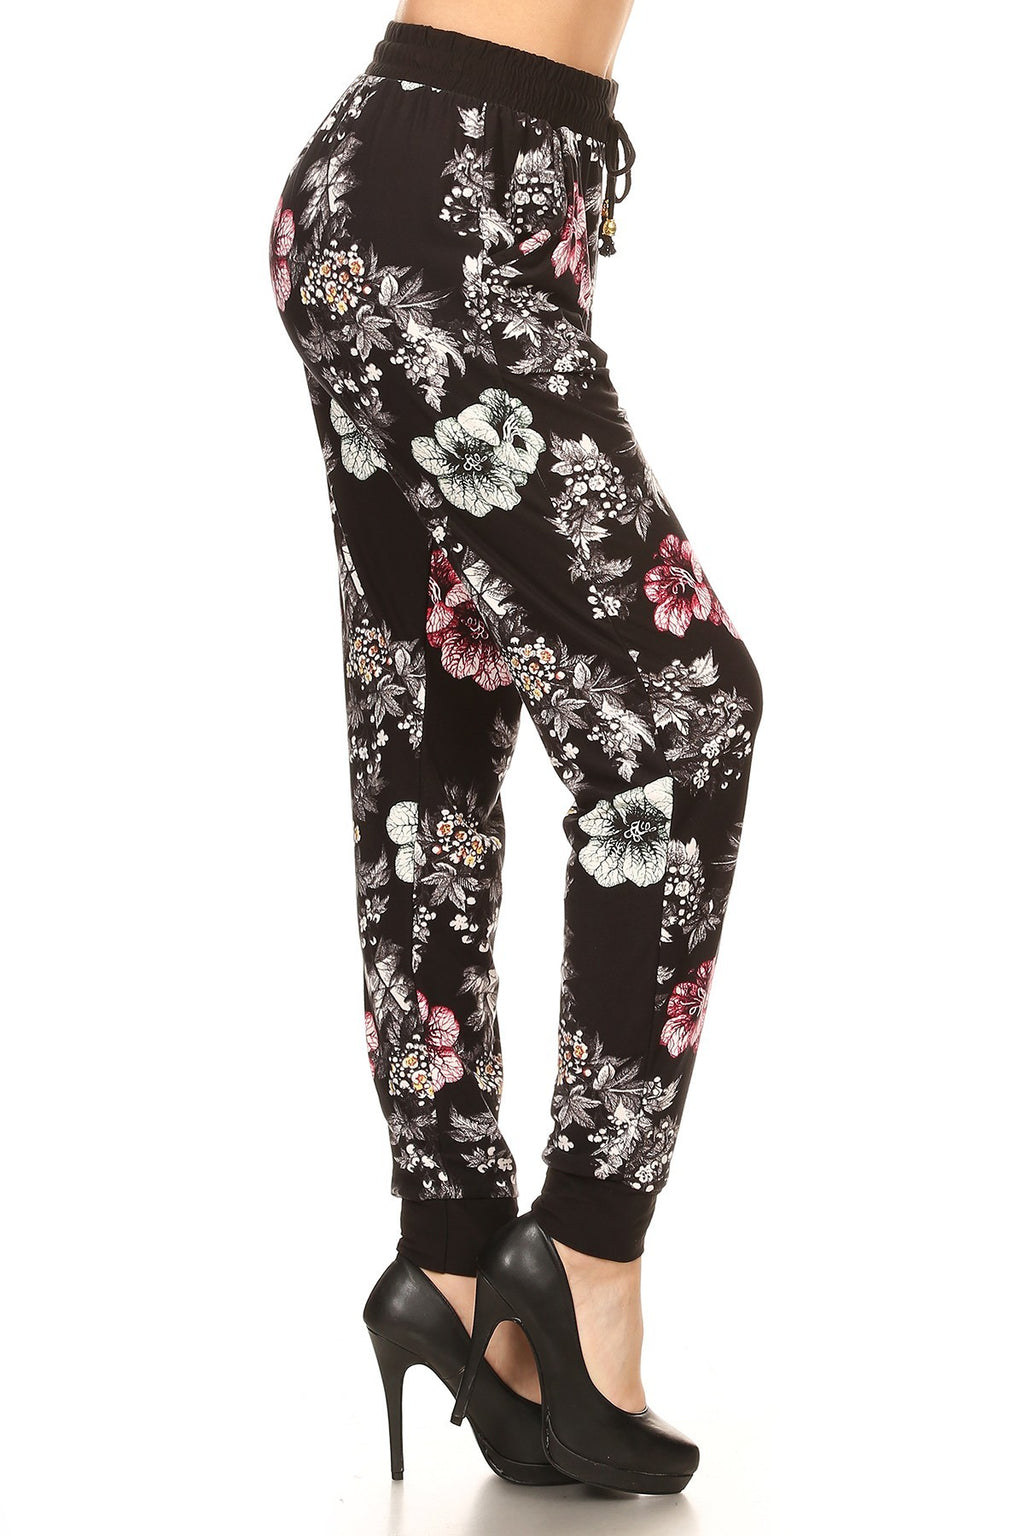 BLACK/WHITE FLORAL  printed joggers with solid trim, drawstring waistband, waist pockets, and cuffed hems